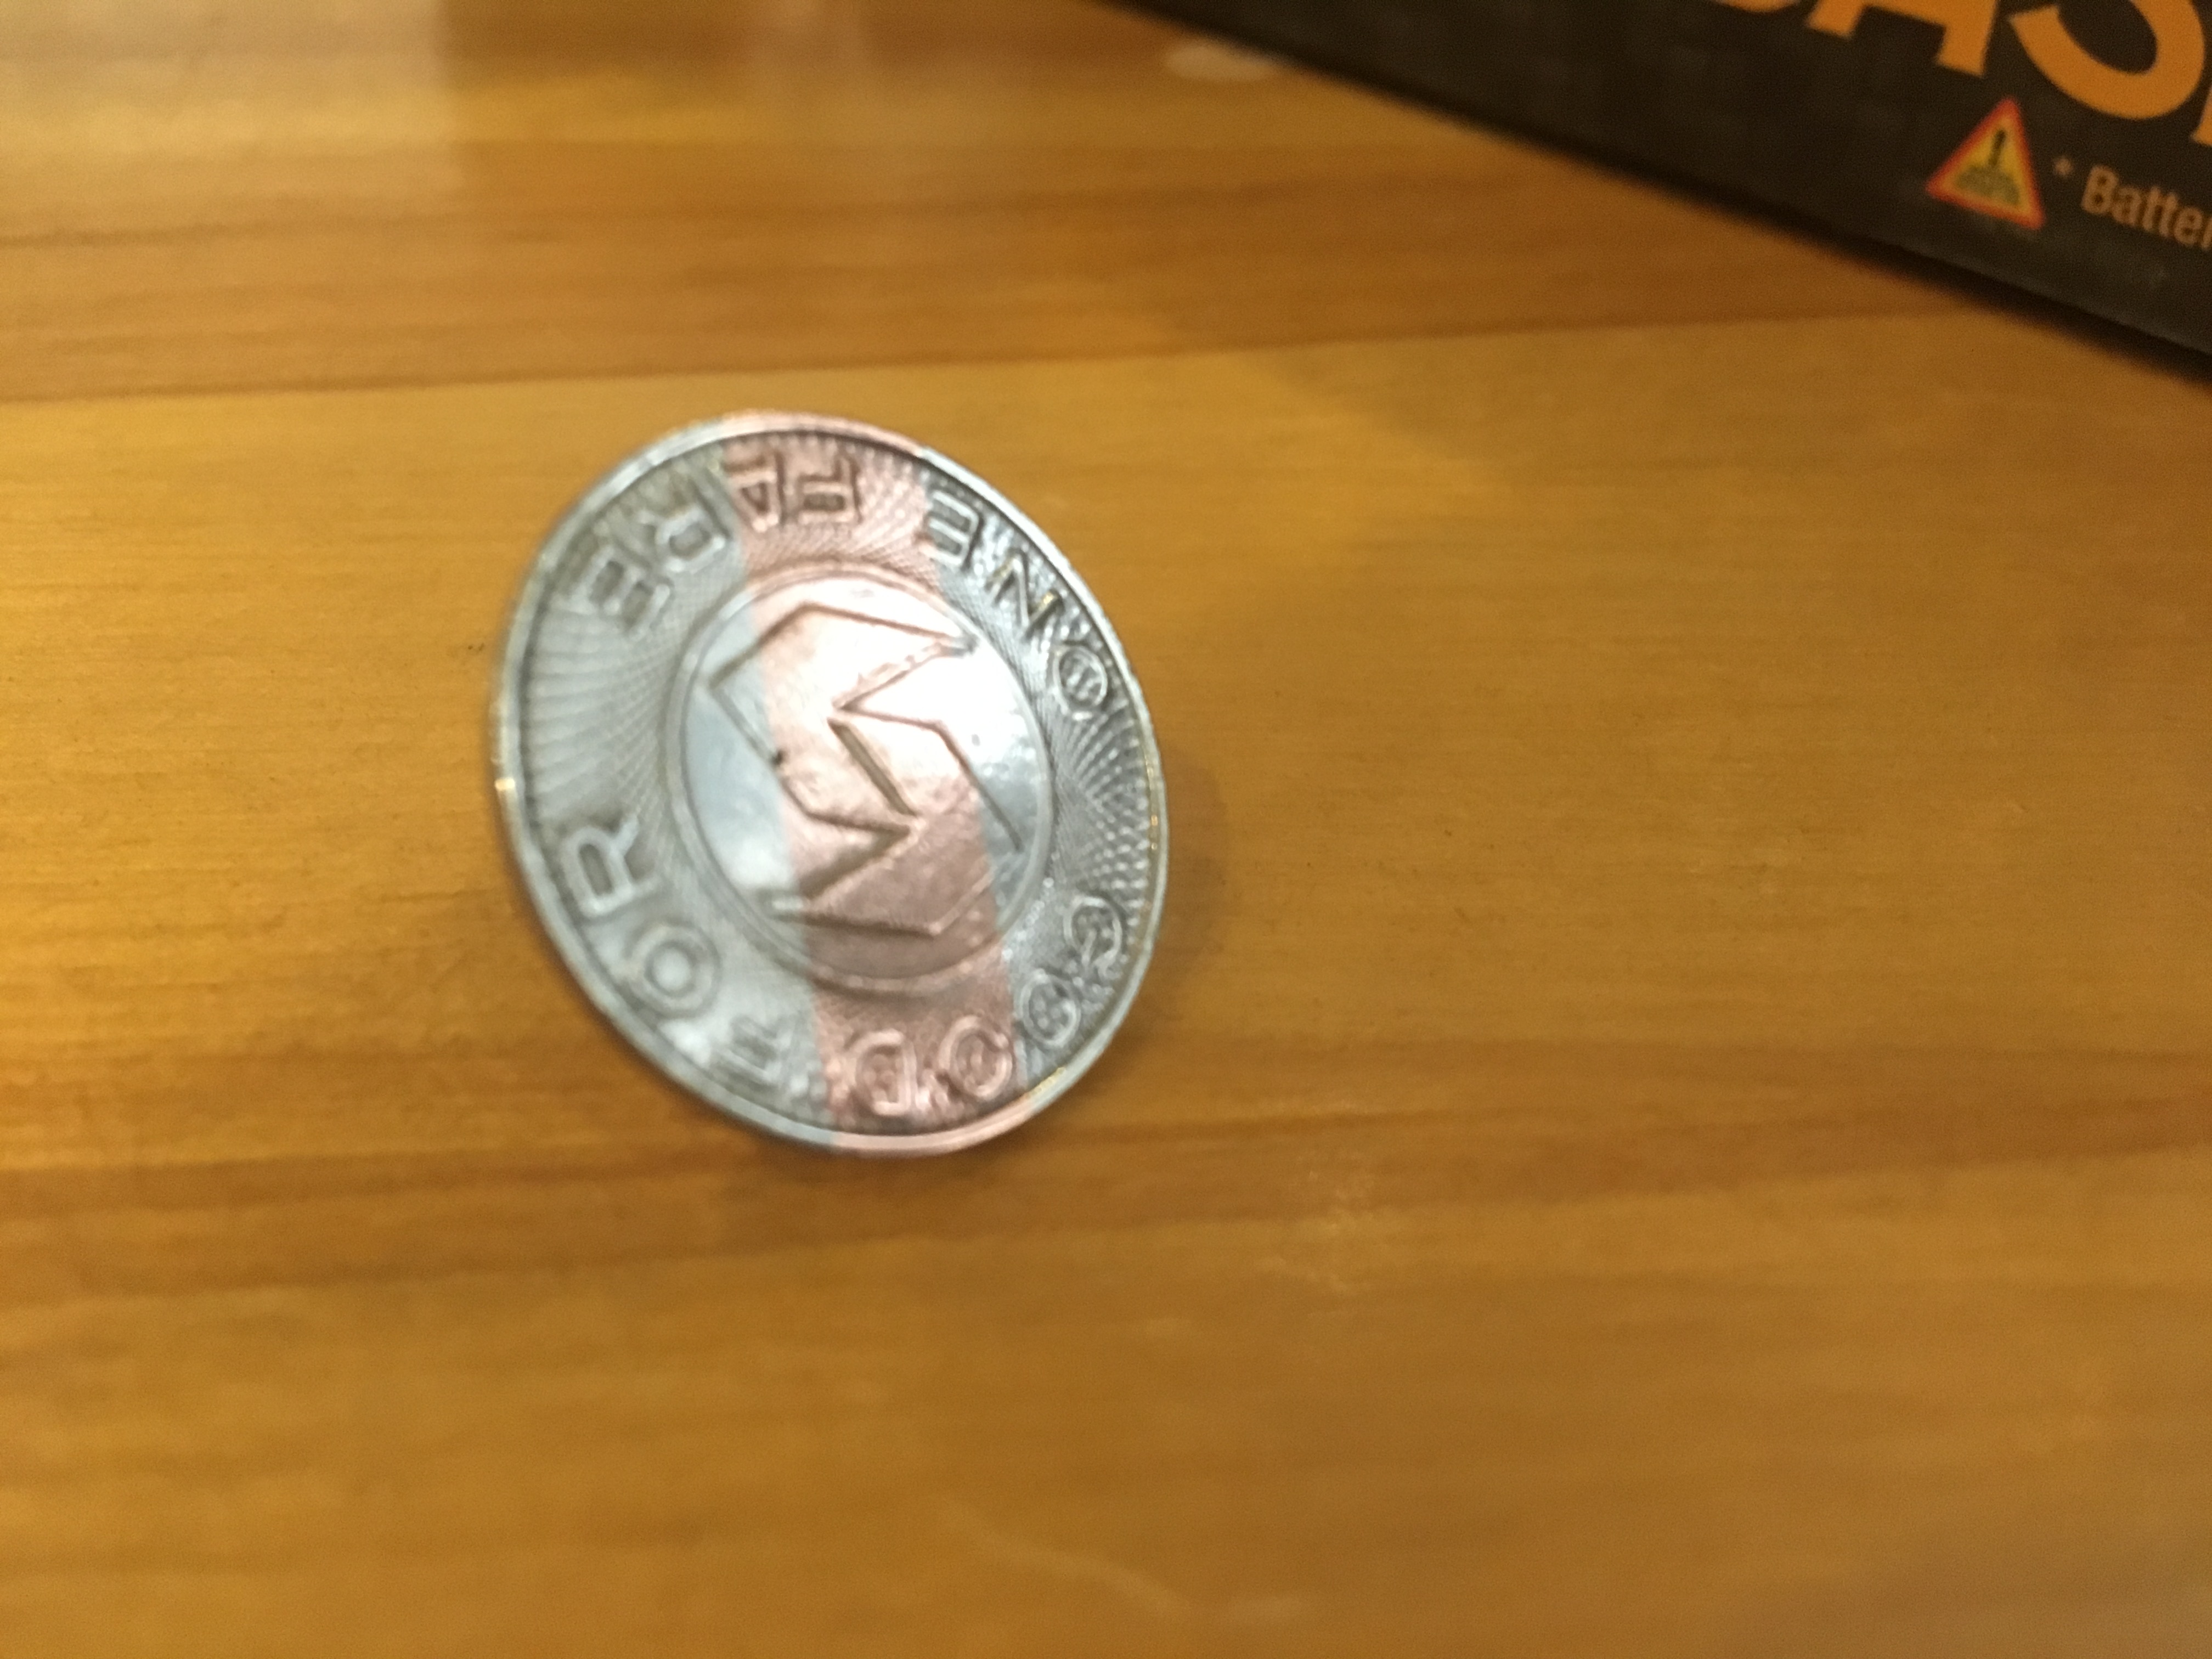 SEPTA Token cufflink, available at the SEPTA gift shop